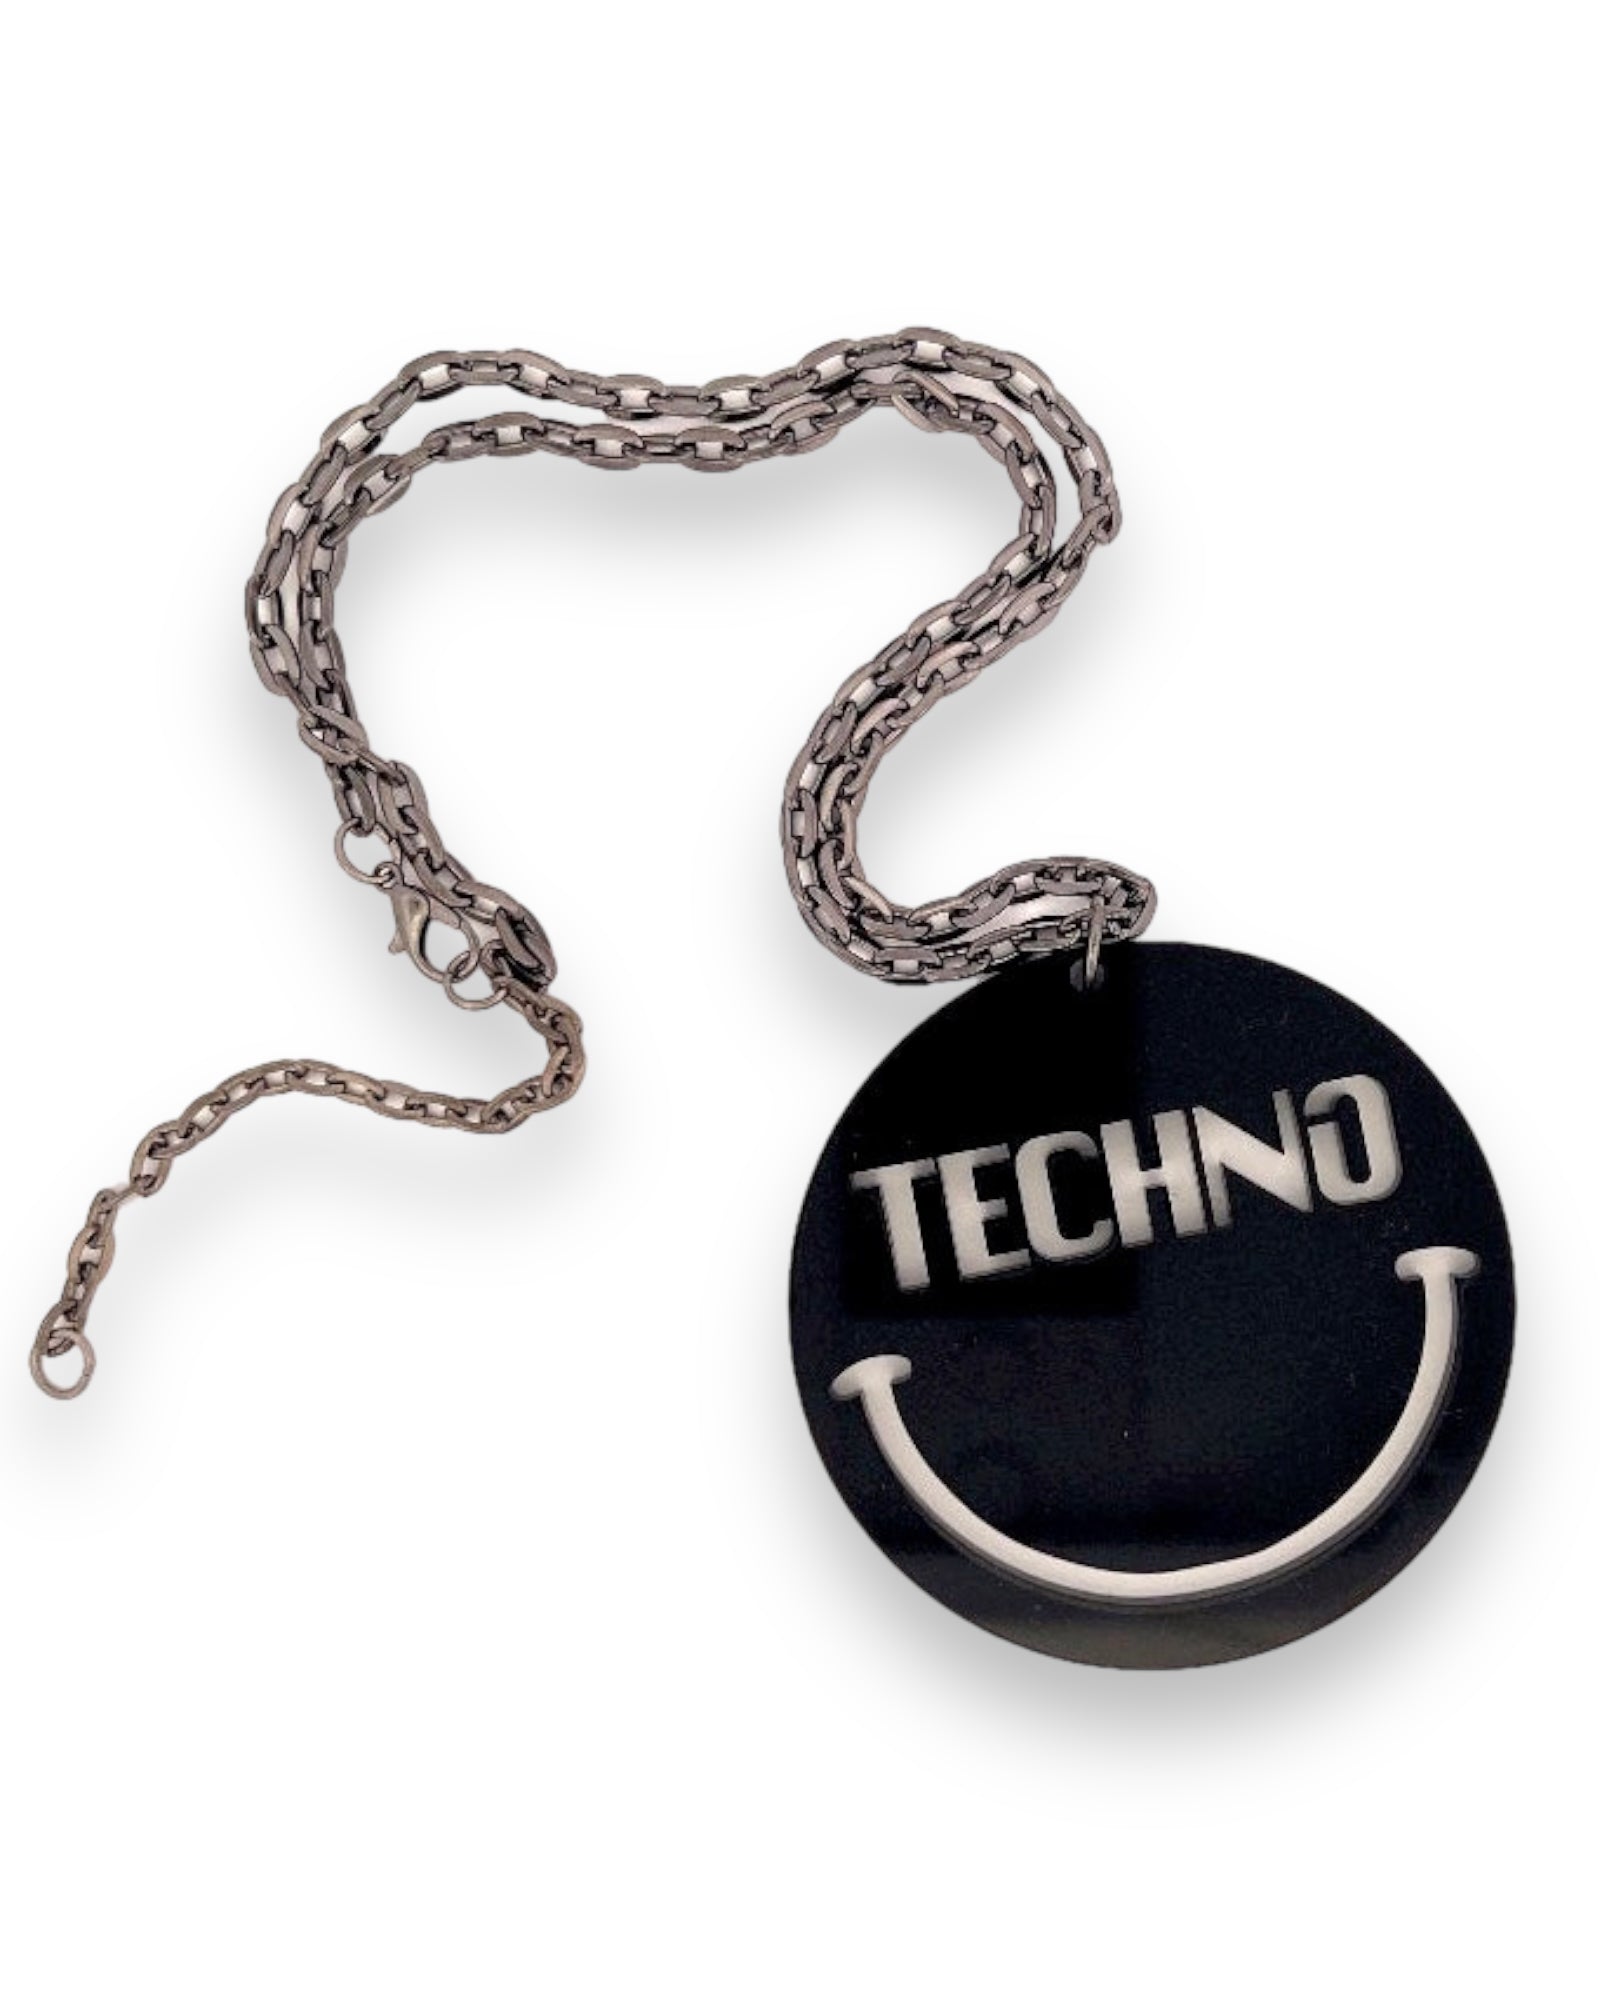 Techno Head Choker Necklace, Necklace, - One Stop Rave